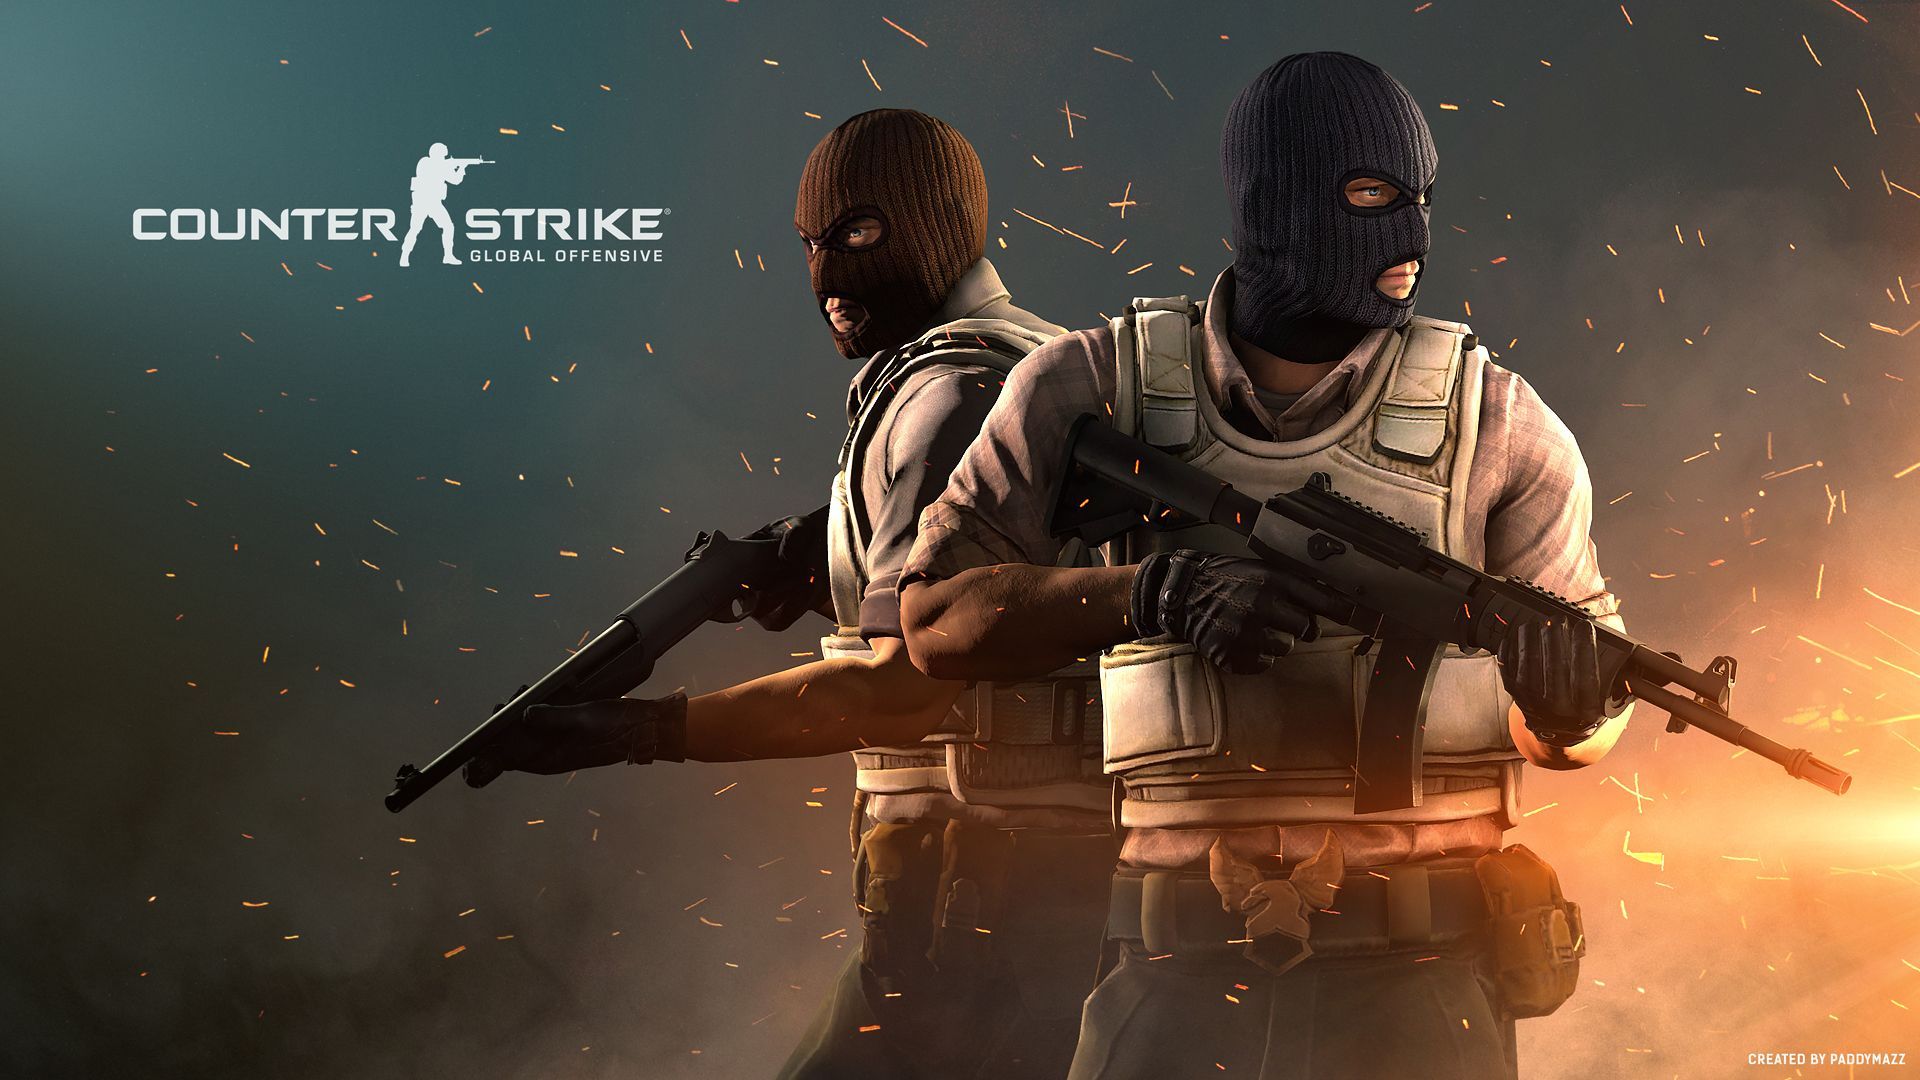 Counter-Strike 2 is real, and coming this summer